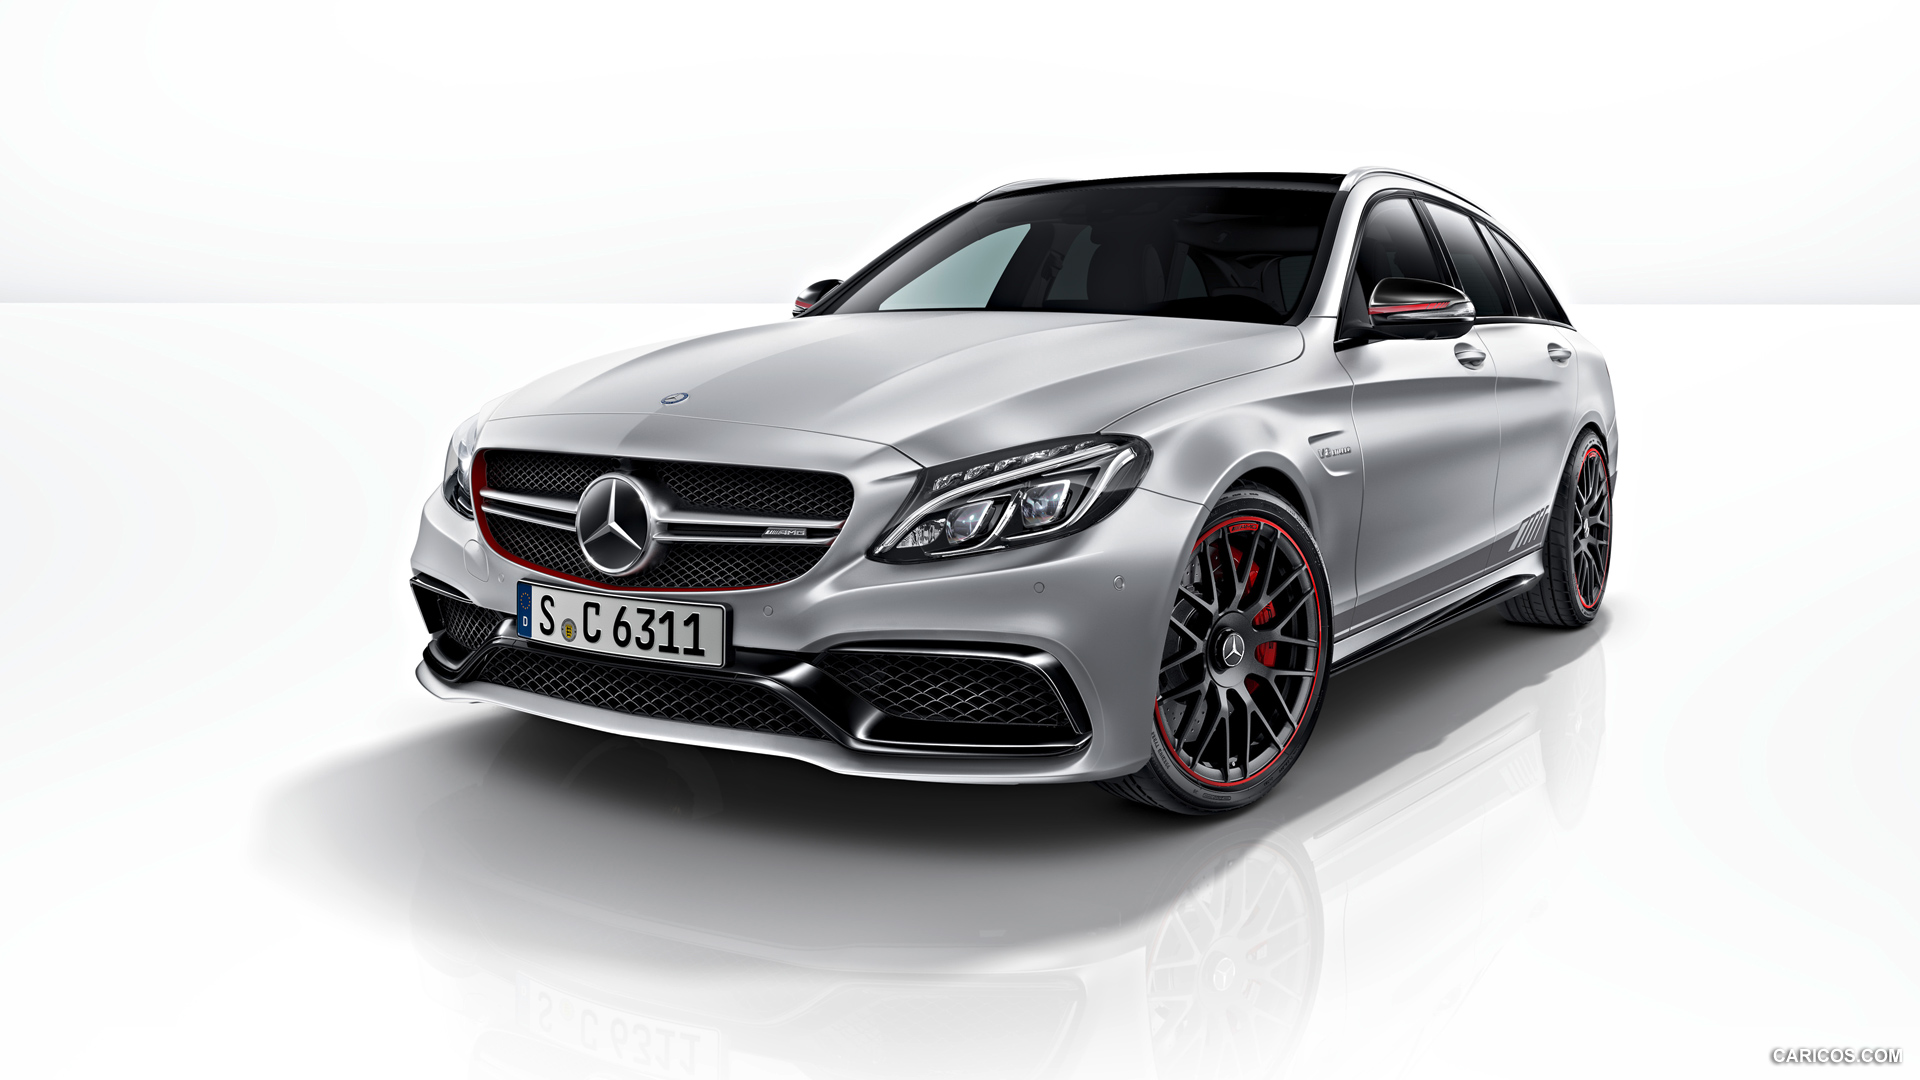  2015 Mercedes-Benz C63 AMG Edition 1 - Front, #6 of 13